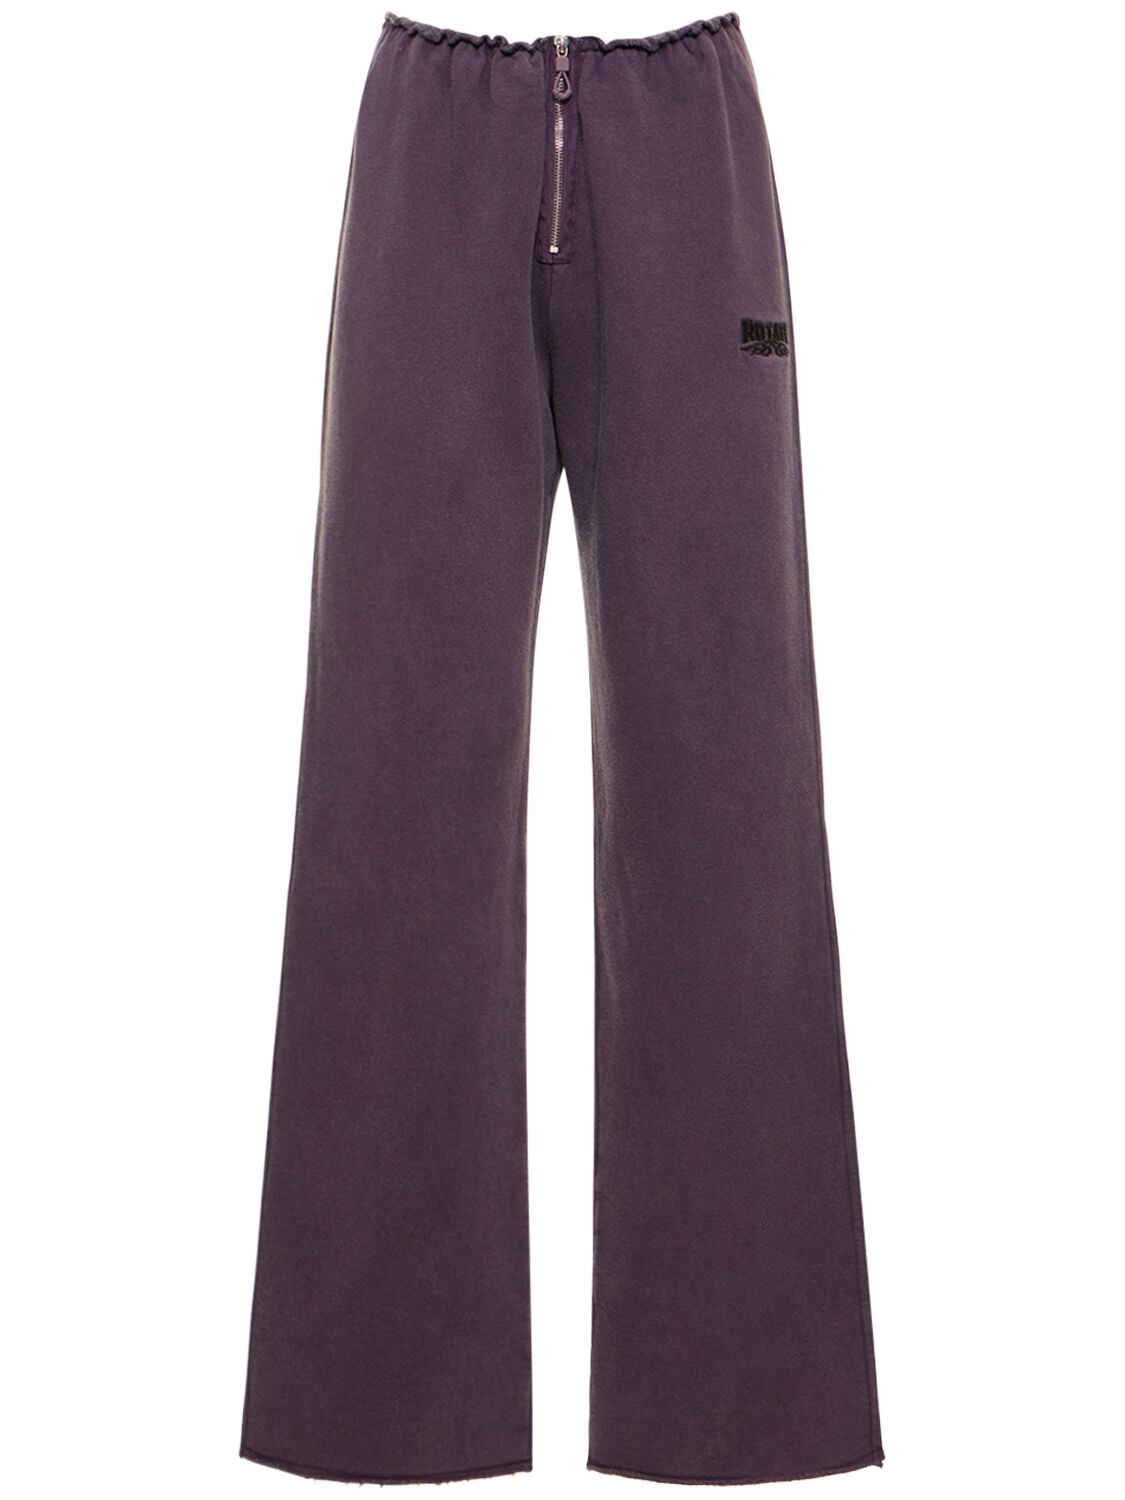 Rotate Birger Christensen Enzyme Cotton Sweatpants In Lila